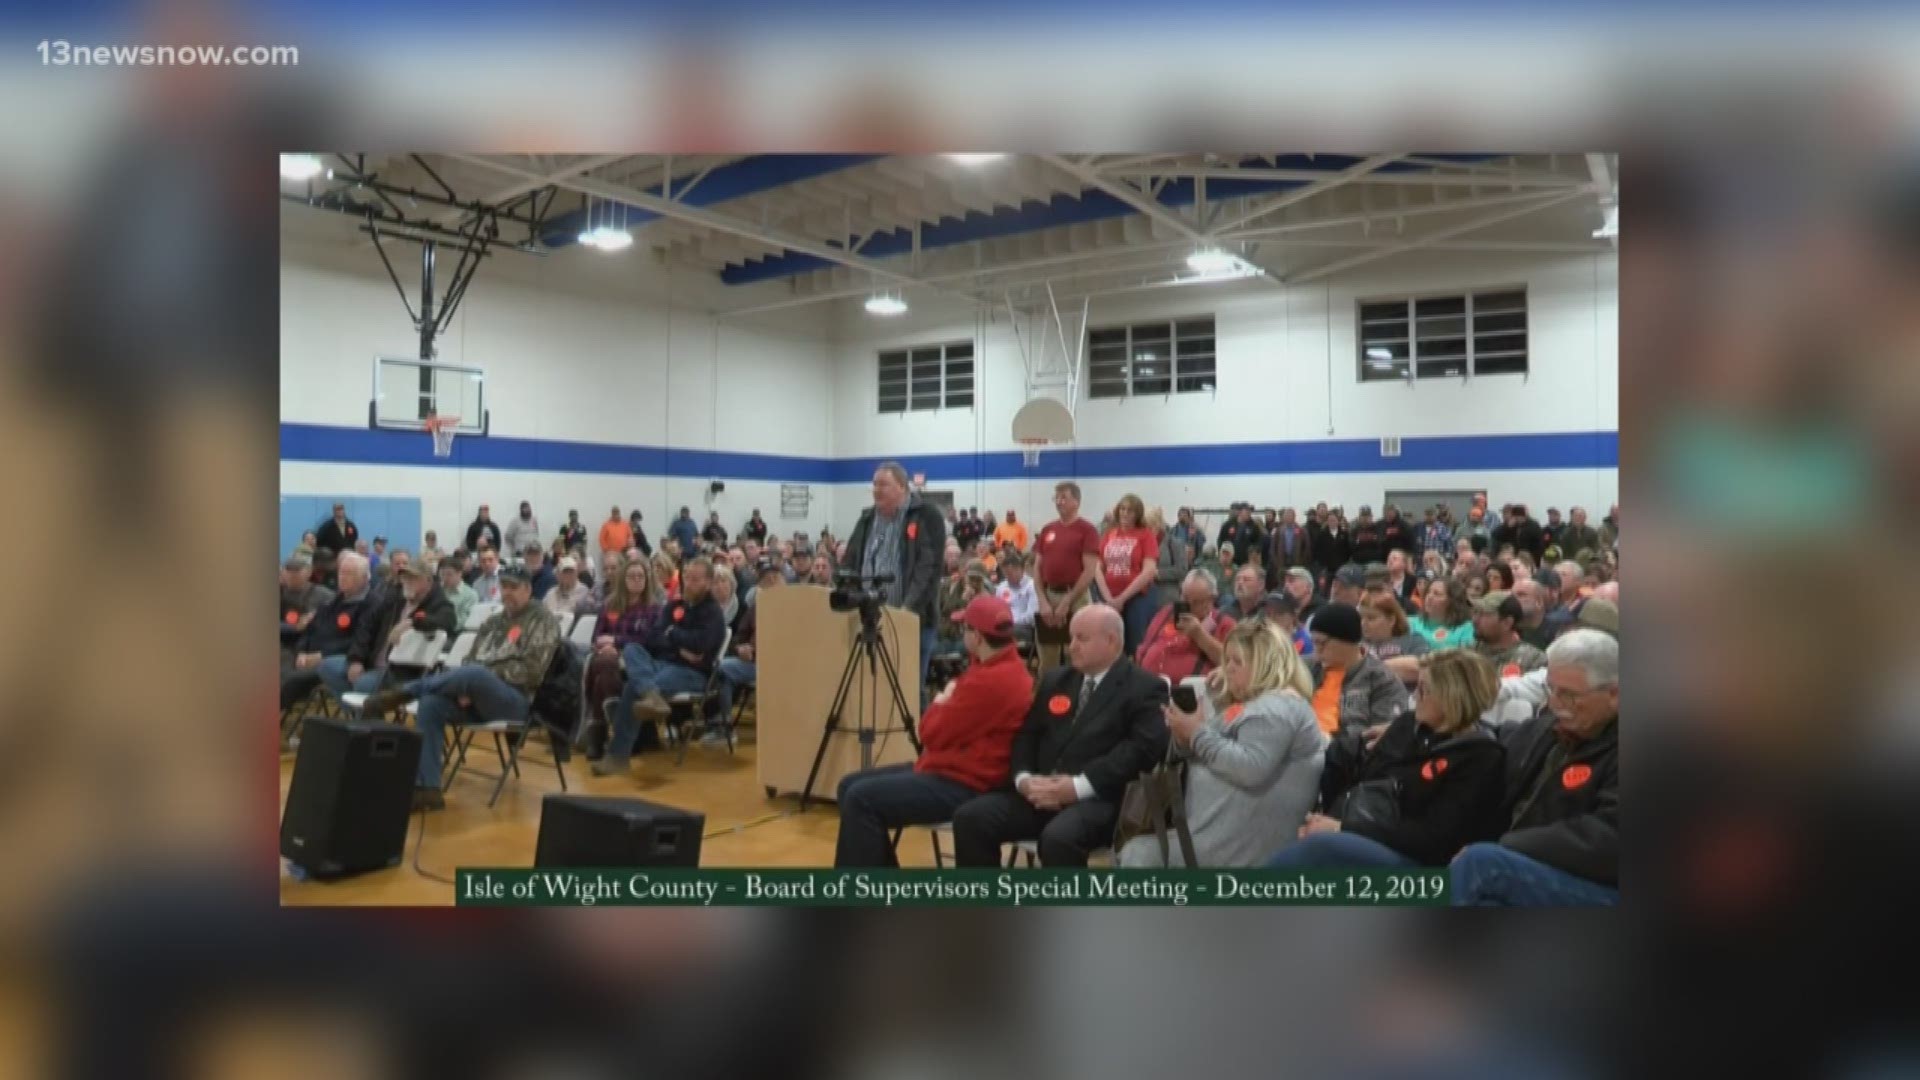 Dozens of gun rights activists attended a meeting in Isle of Wight where the Board of Supervisors voted to make it a Second Amendment Constitutional county.